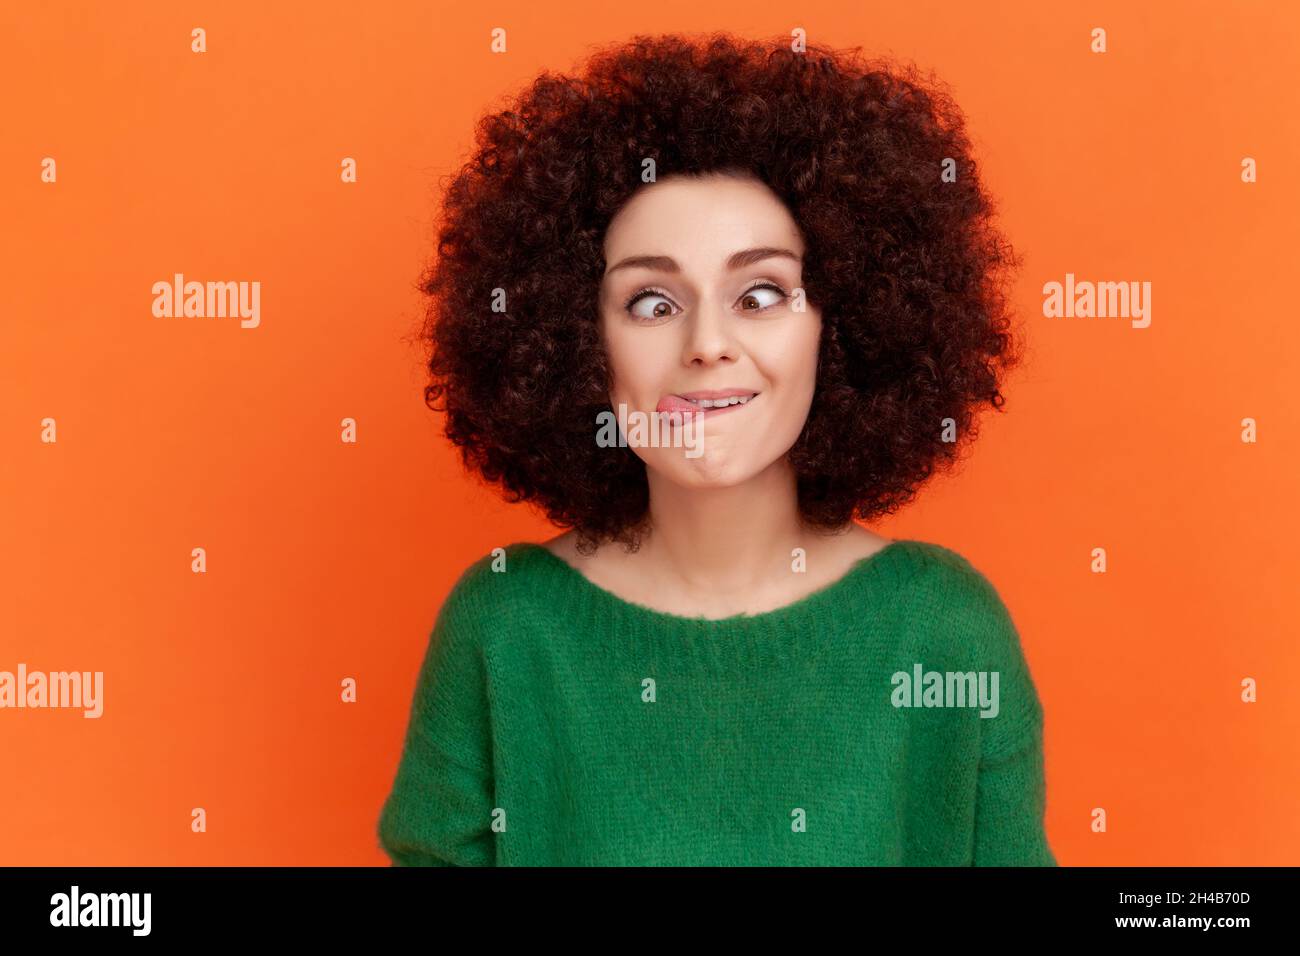 Foolish woman with Afro hairstyle wearing green casual style sweater standing with crossed eyes and tongue out, childish behavior. Indoor studio shot isolated on orange background. Stock Photo